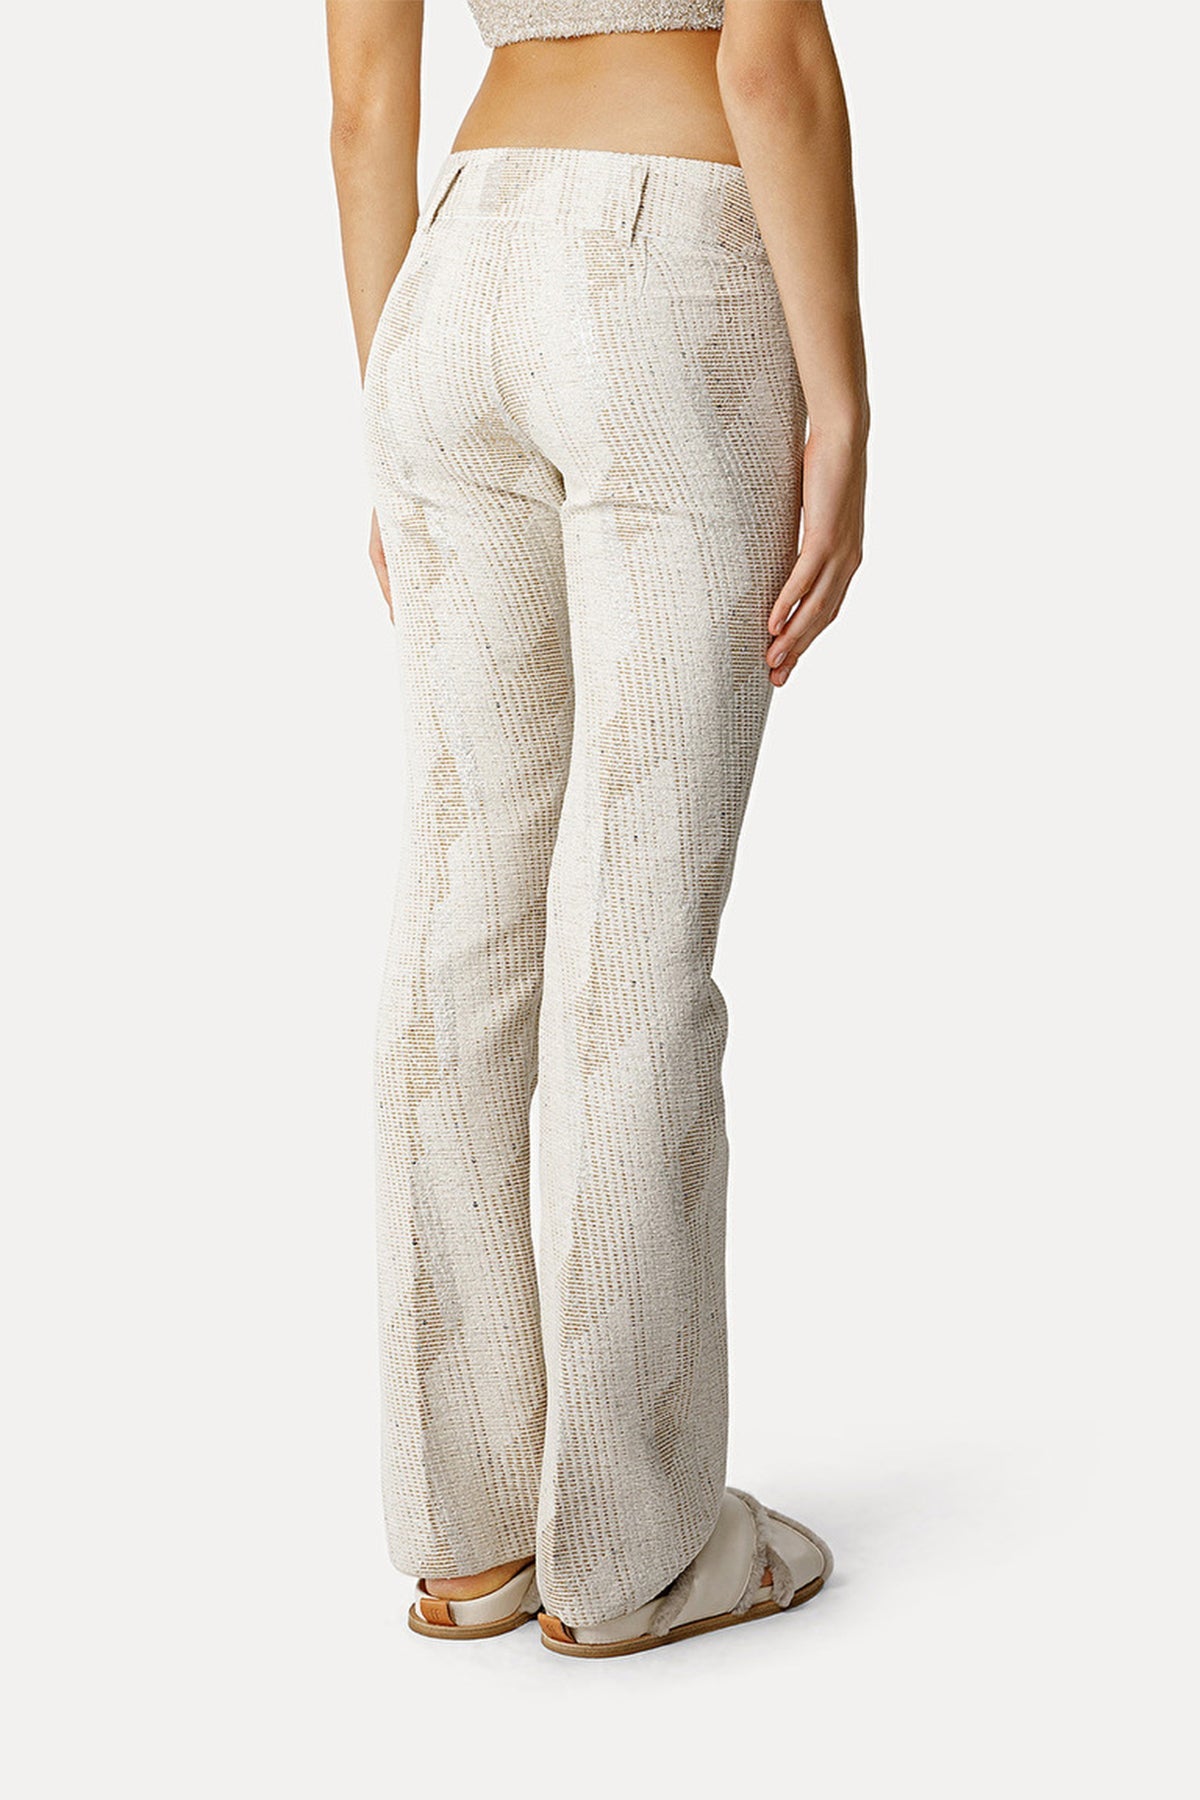 “Endless Skies” Jacquard Trousers in Ivory - shop-olivia.com